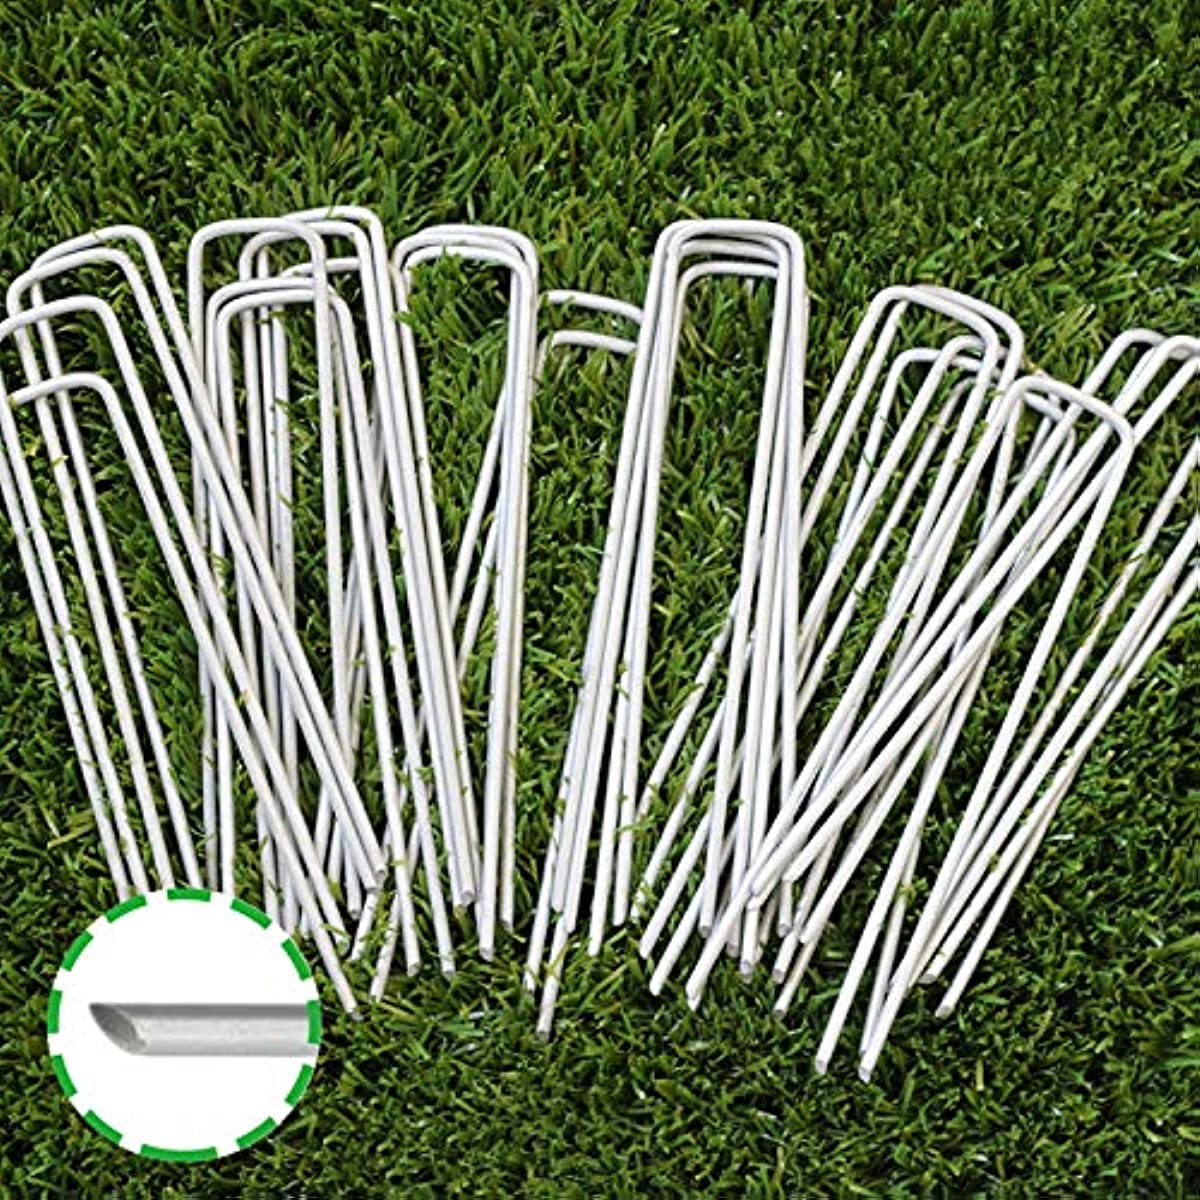 

50pcs Galvanized Steel Garden Stakes Staples Securing Pegs For Securing Fabric Landscape Fabric Netting Ground Sheets And Fleece, 6 Inches